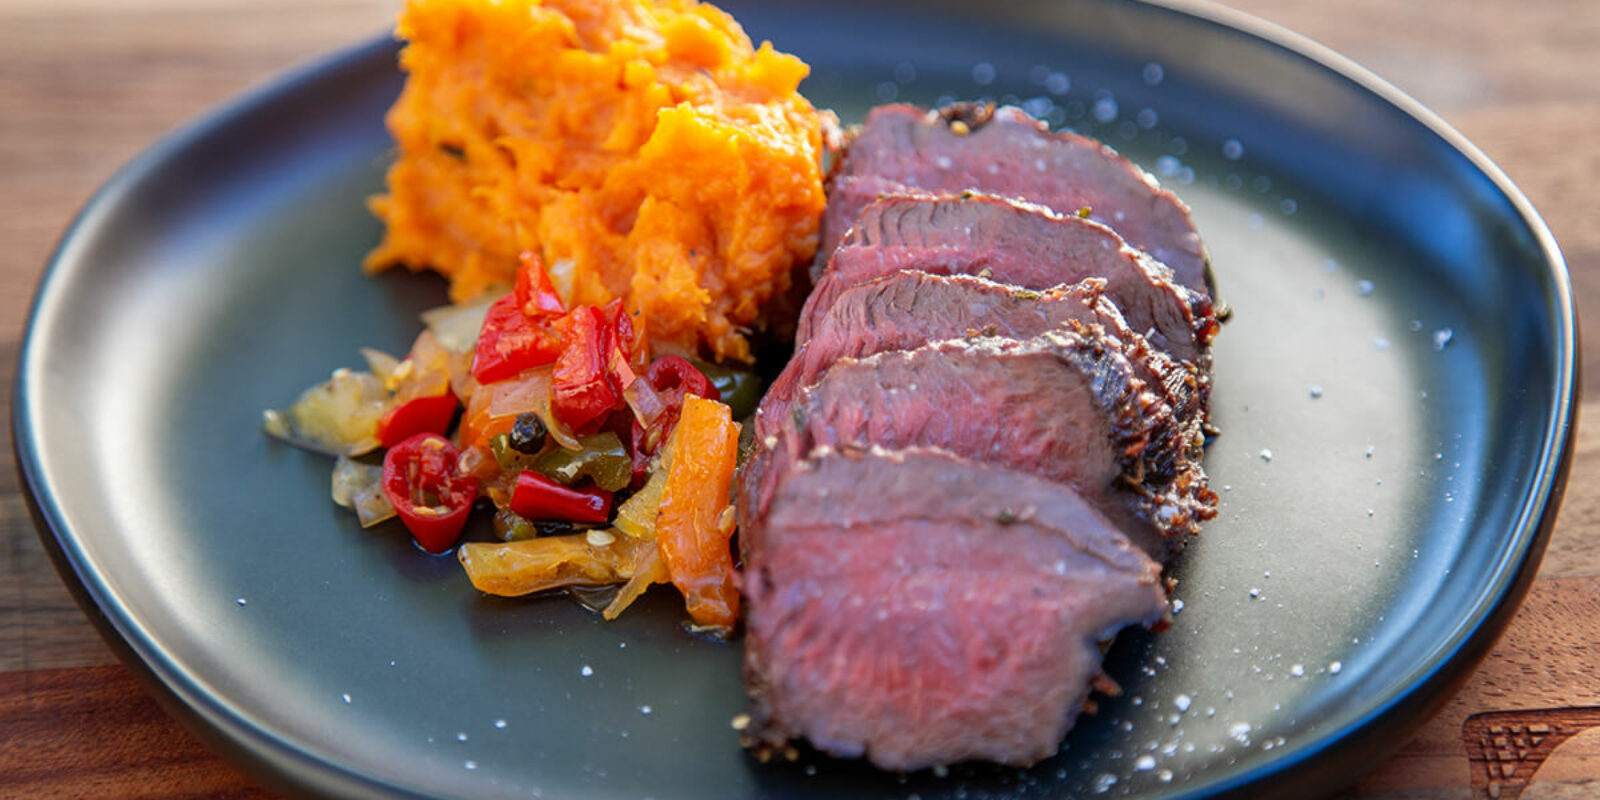 Pan Seared Venison With Coal Roasted Sweet Potatoes And Pepper Relish